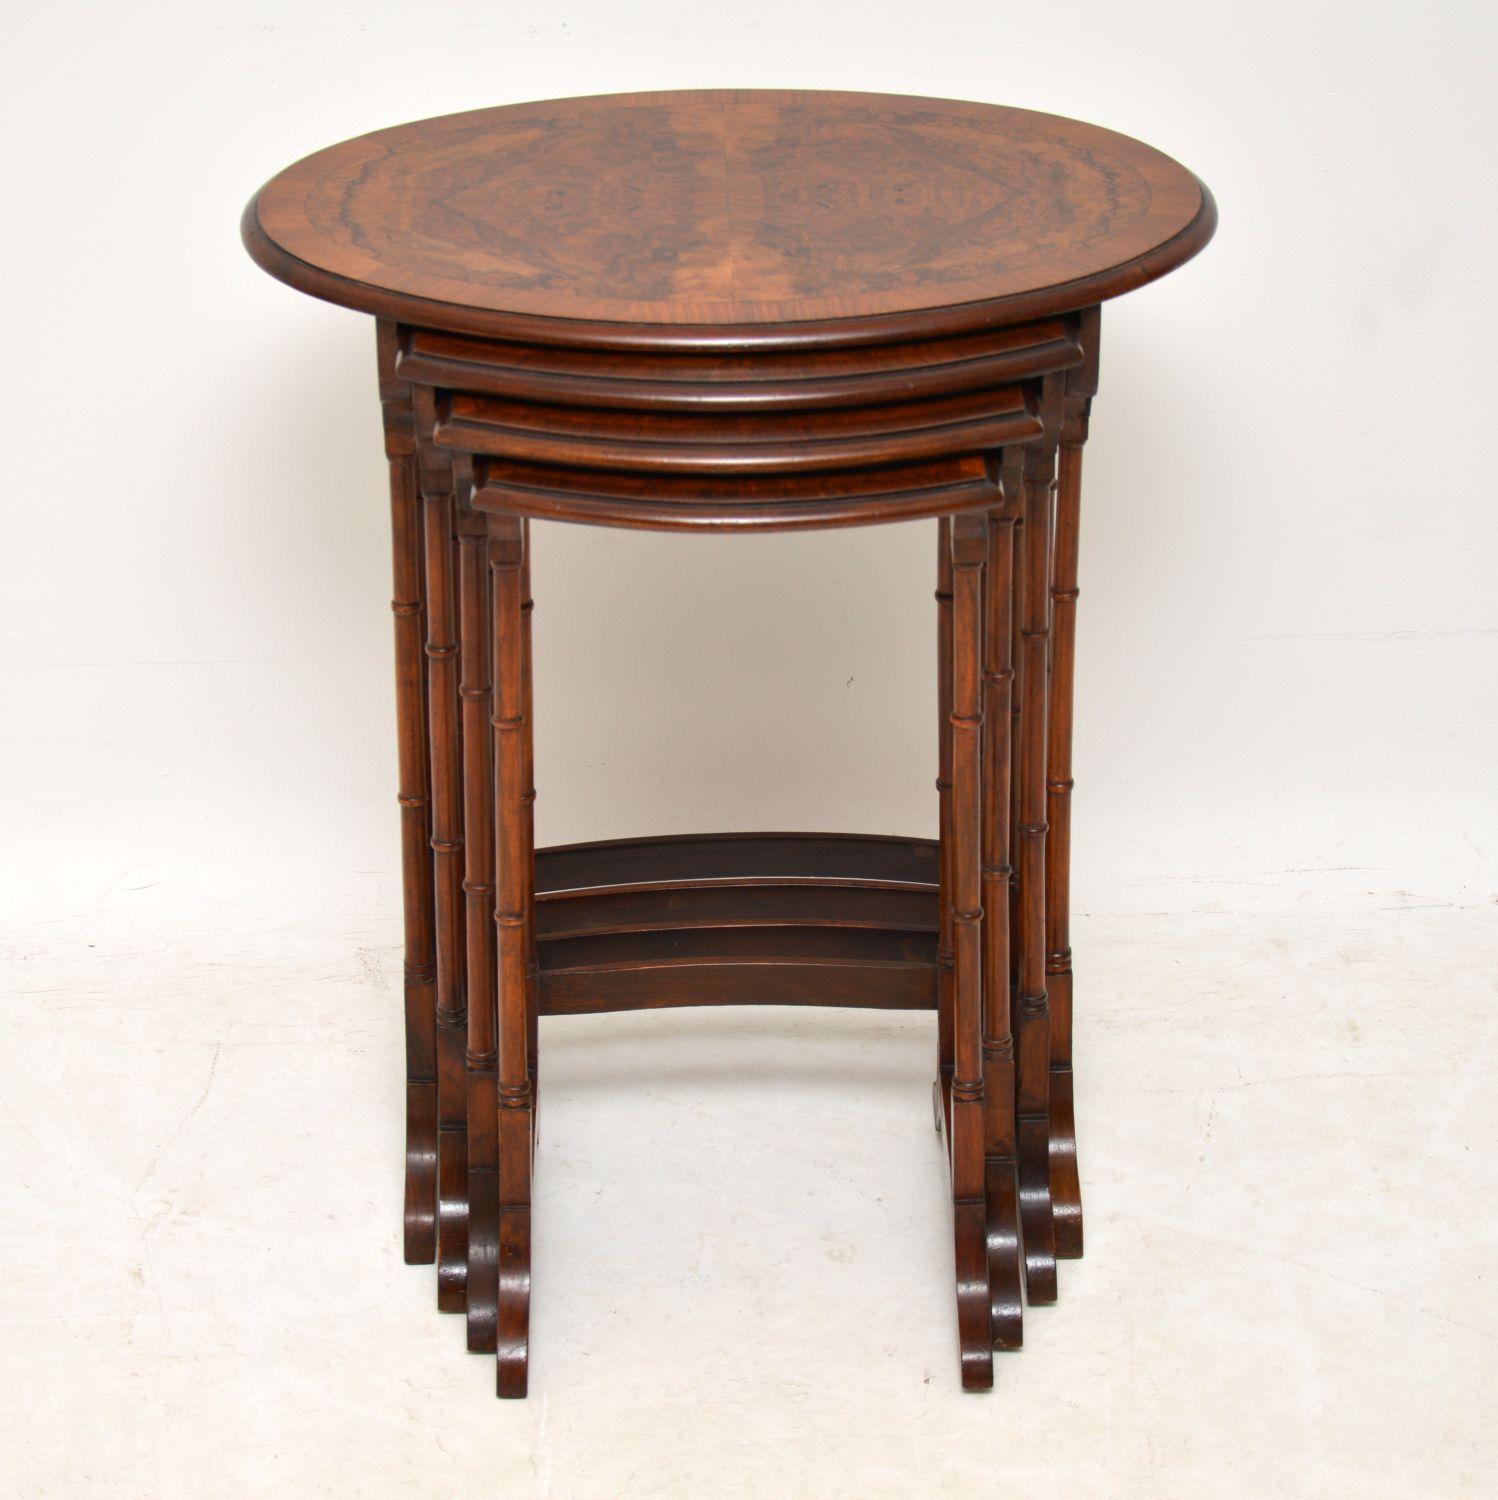 Antique Edwardian walnut nest of four tables in excellent condition, with beautifully figured burr walnut tops that are cross banded on the edges. The patterns on each top are different and exquisite. They have turned walnut legs with curved